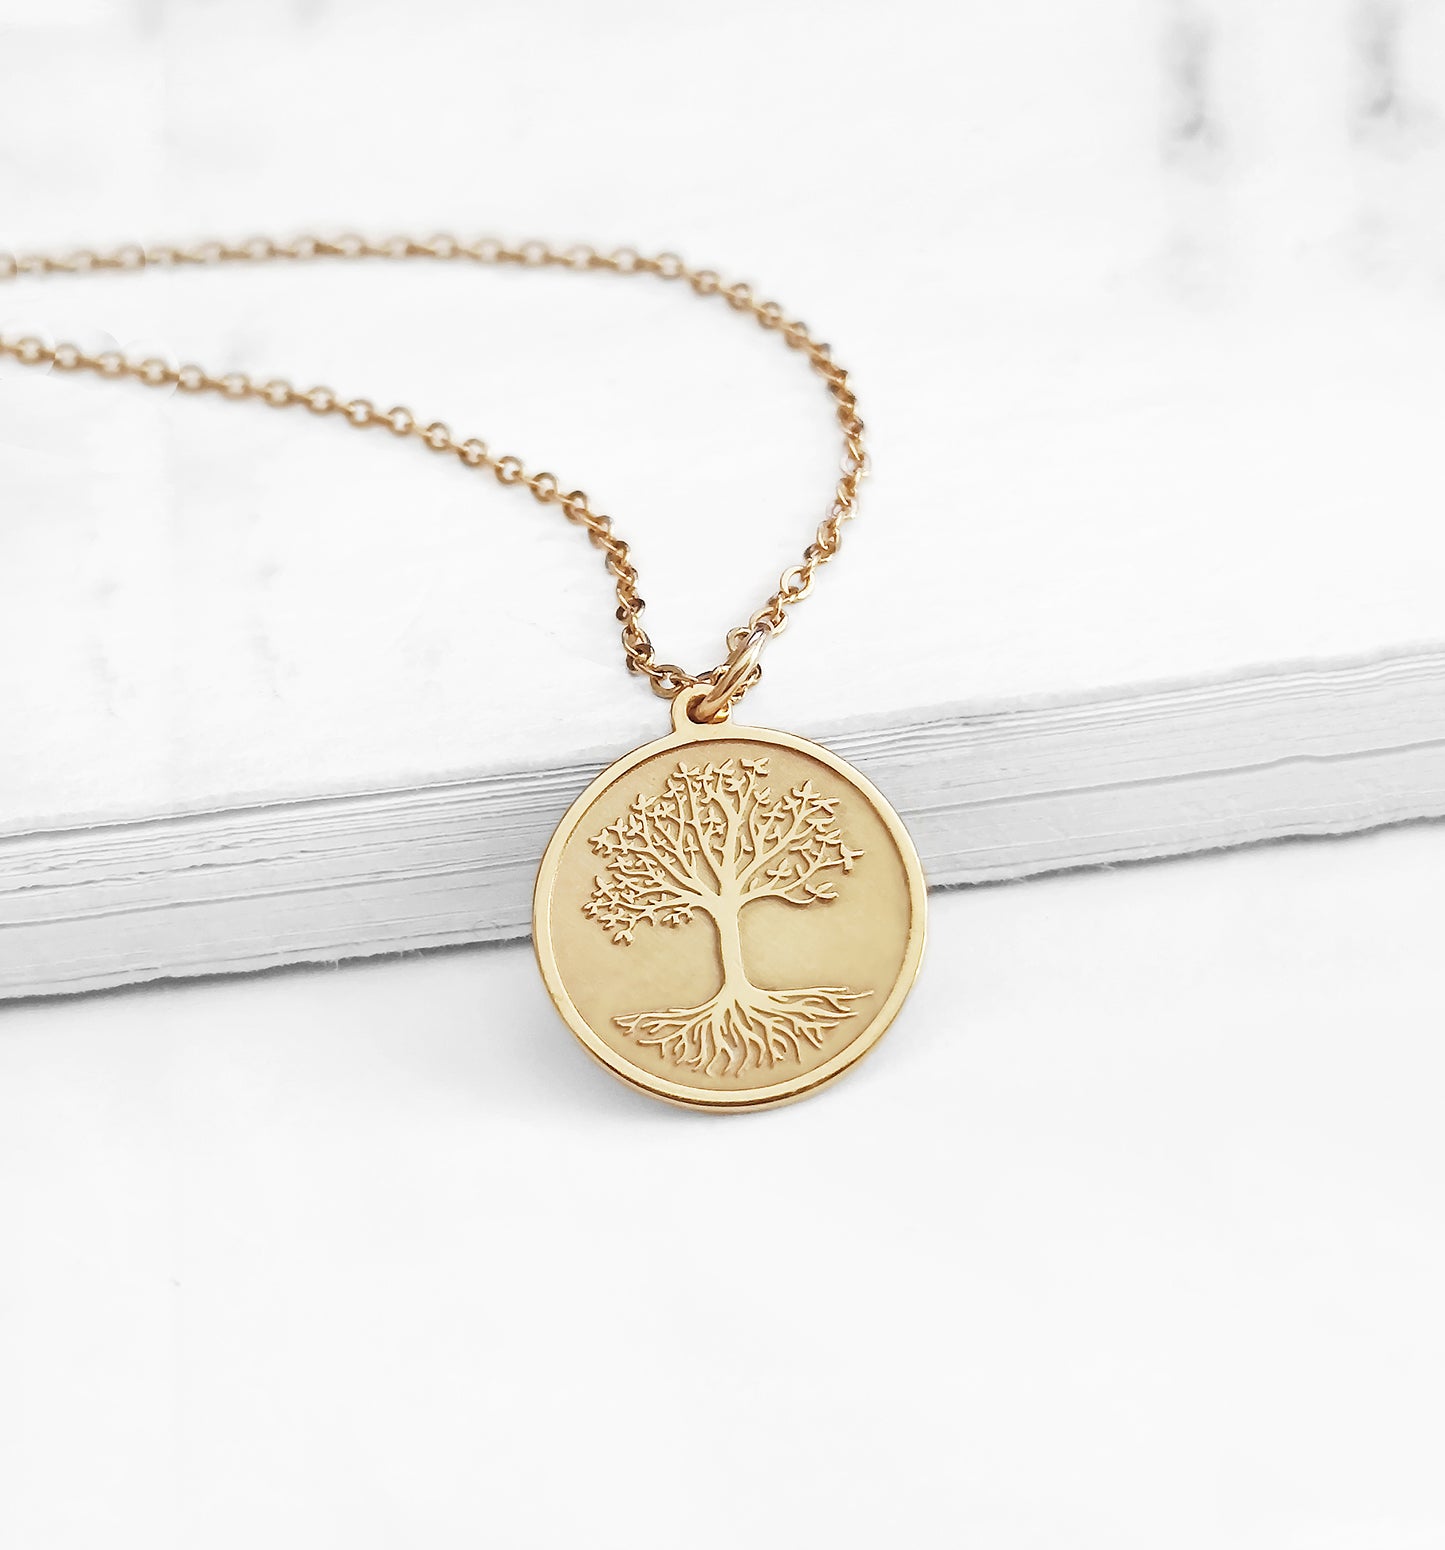 14K 9K Solid Gold Personalized Tree of Life Yggdrasil Pendant Necklace